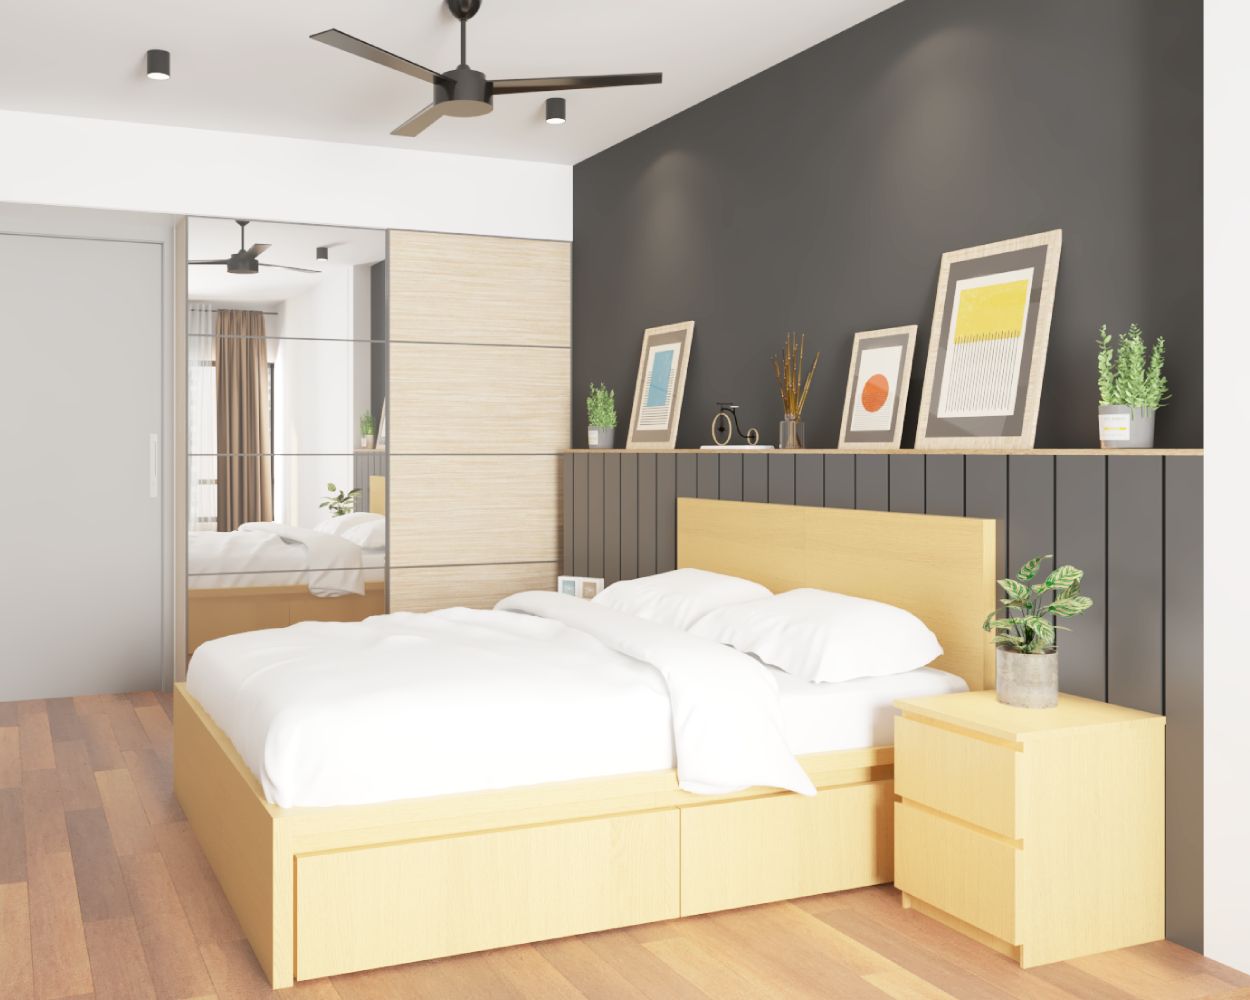 Contemporary Bedroom Design With Grey Vertical Wall Panels